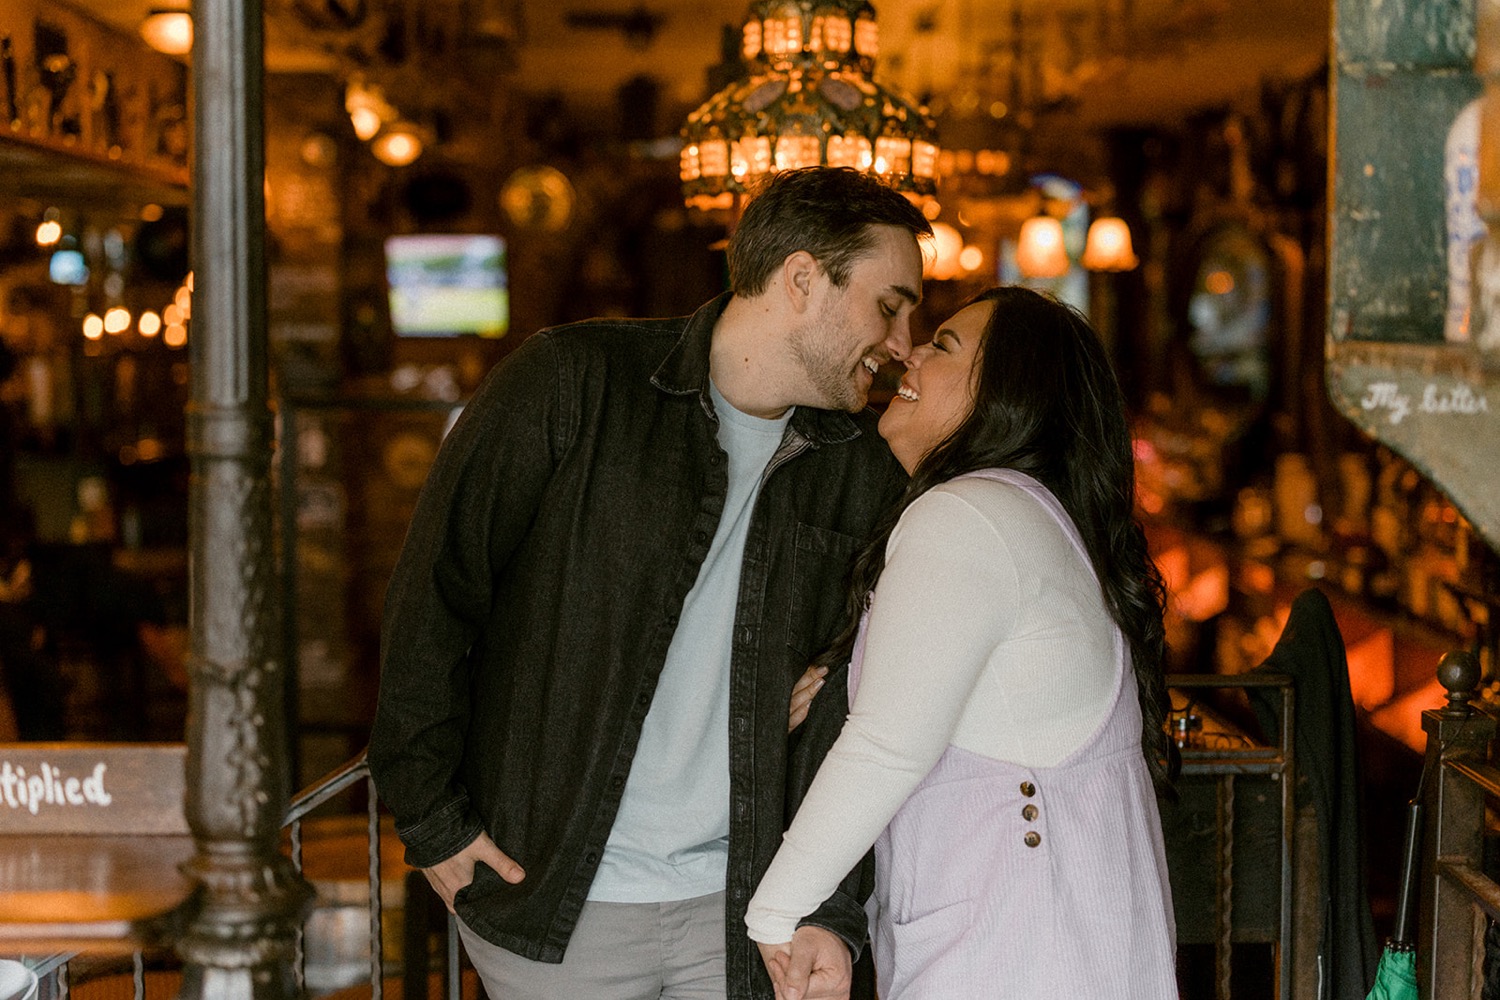 couple kissing in eccentric eclectic bar